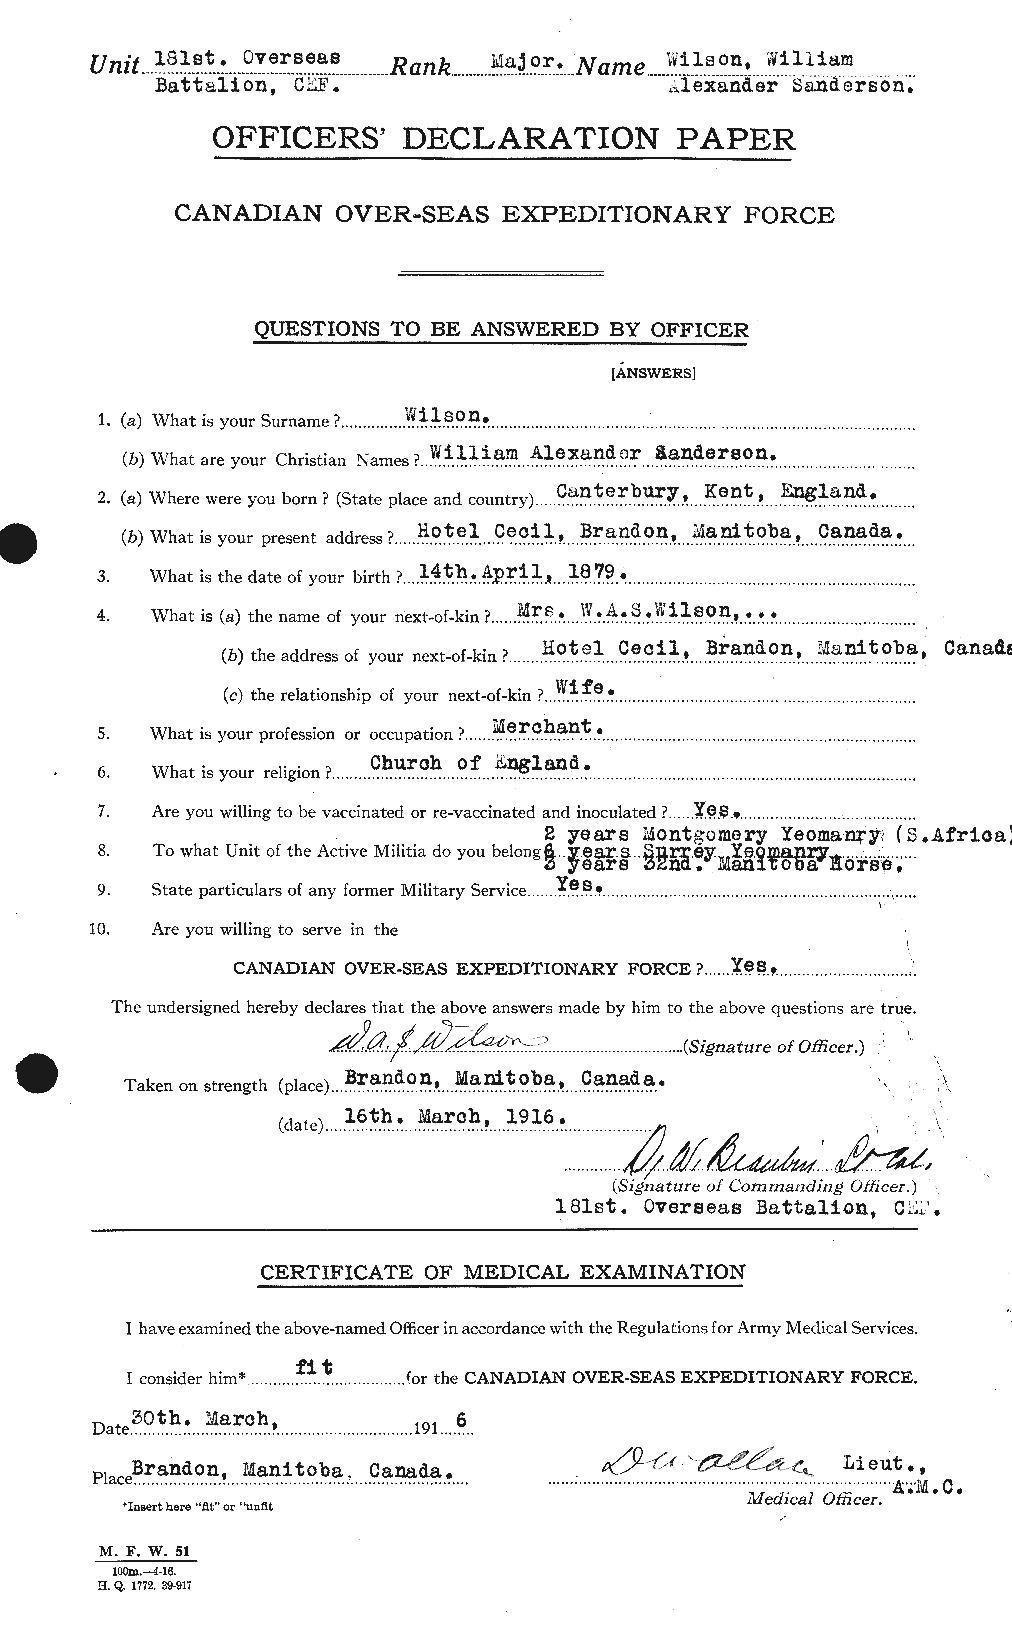 Personnel Records of the First World War - CEF 681927a